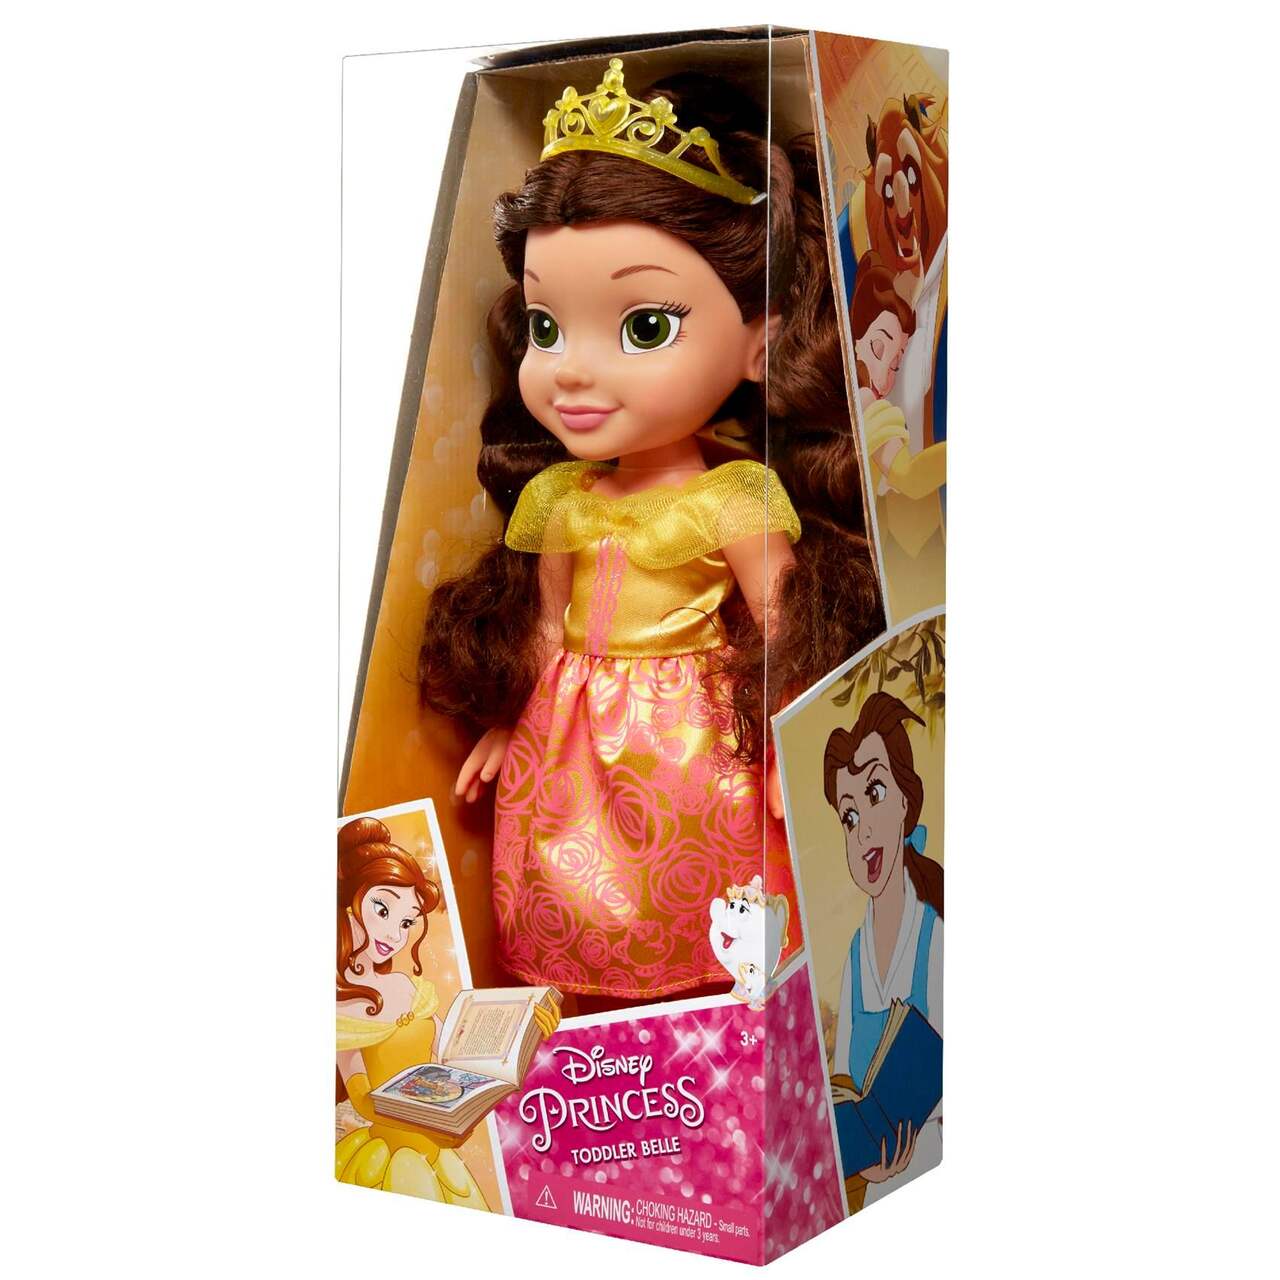 Disney Princess Doll Toy & Child Sized Dress Set, Assorted Characters, Ages  3+